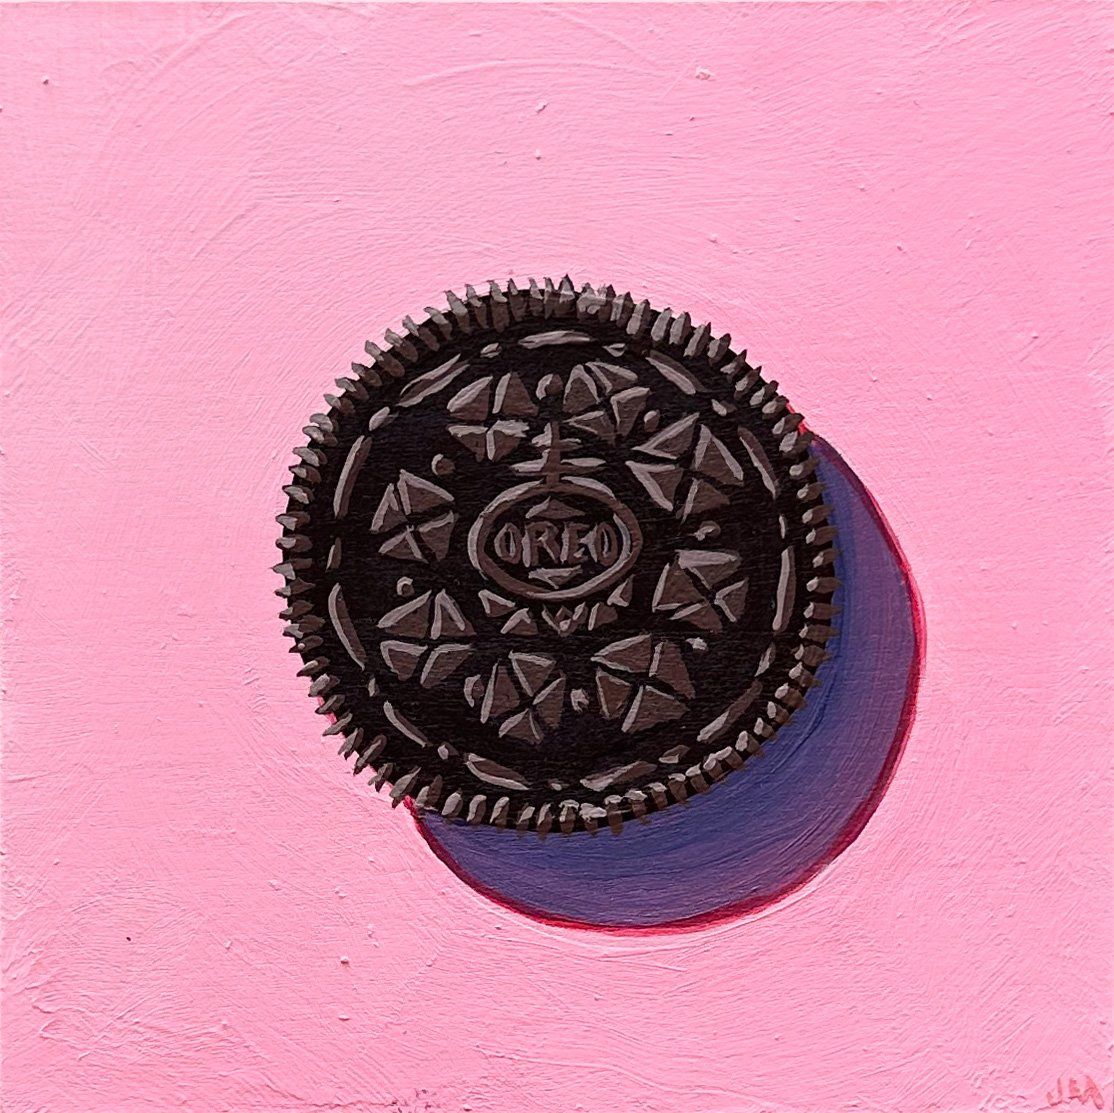 A painting of an Oreo chocolate cookie on a pink background - Oreo